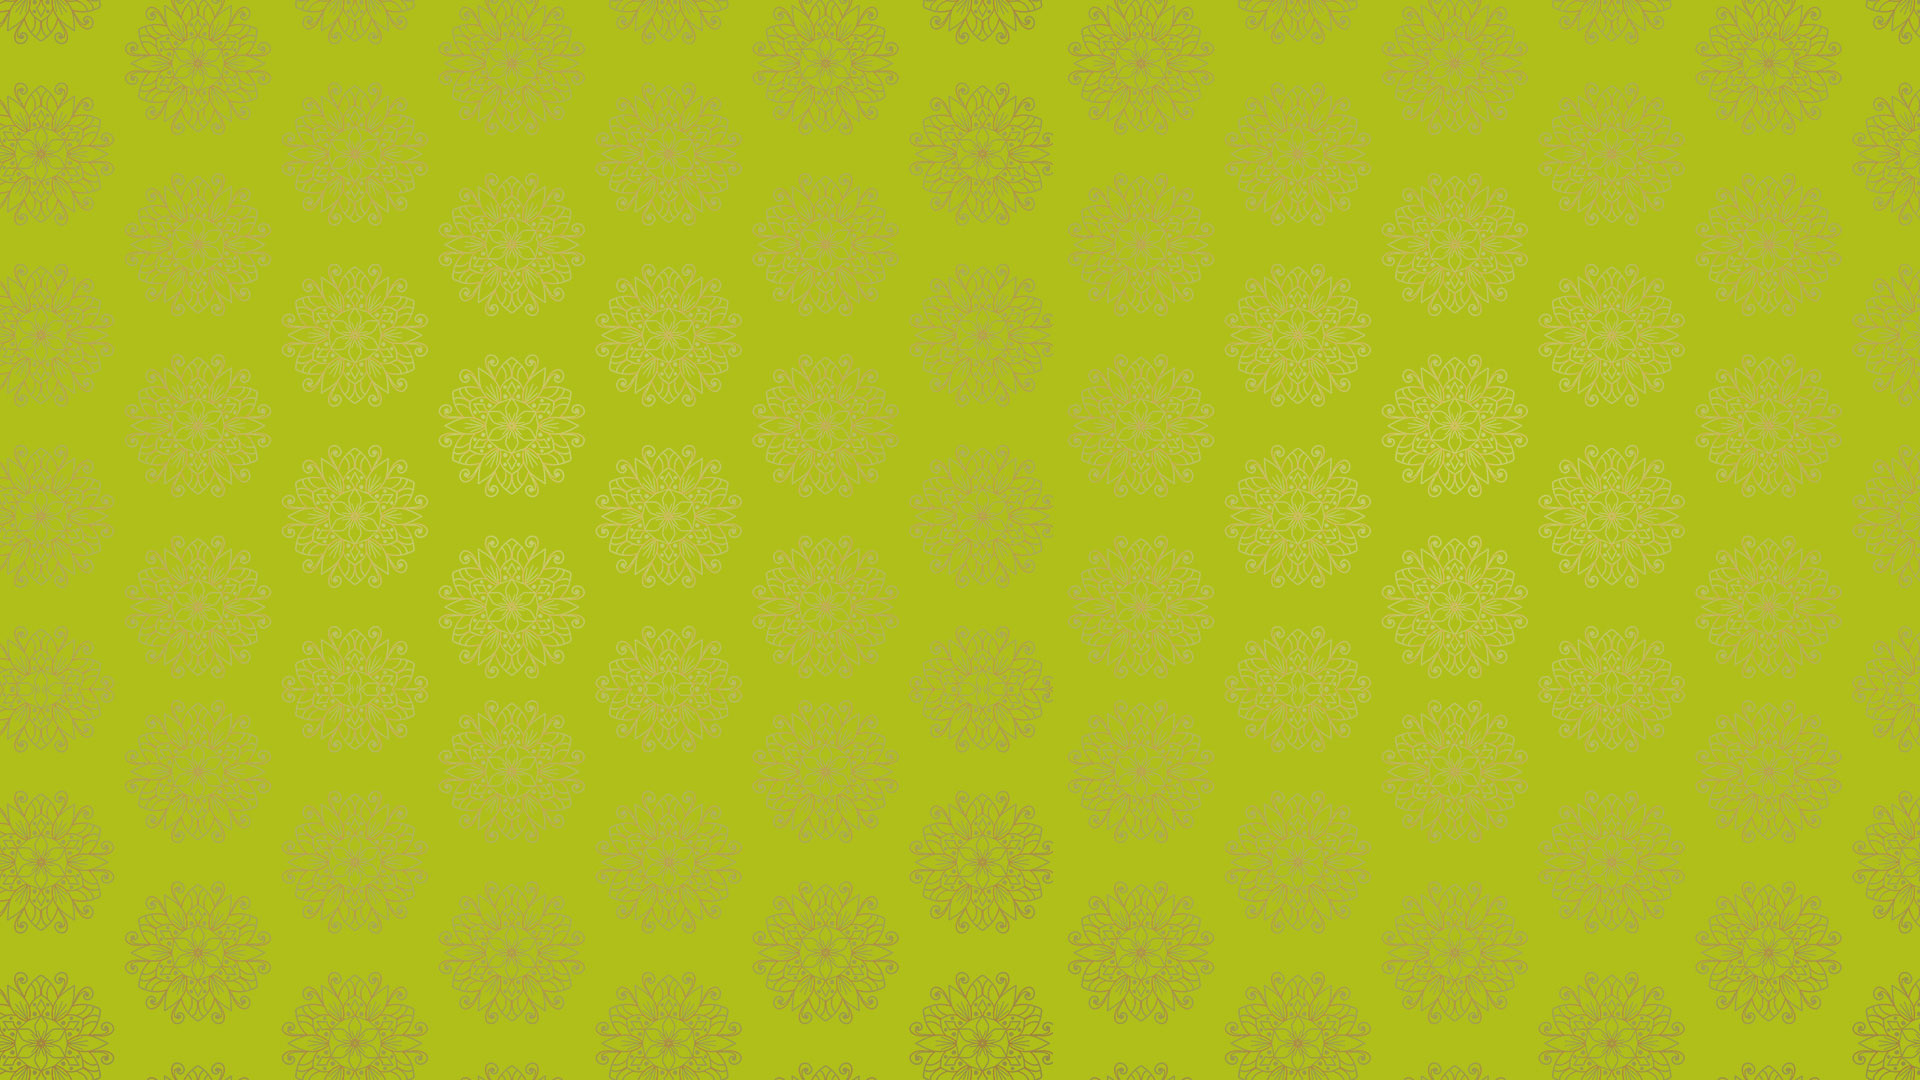 Acid green free wedding, traditional, royal, invitation, party, design, royalty free background